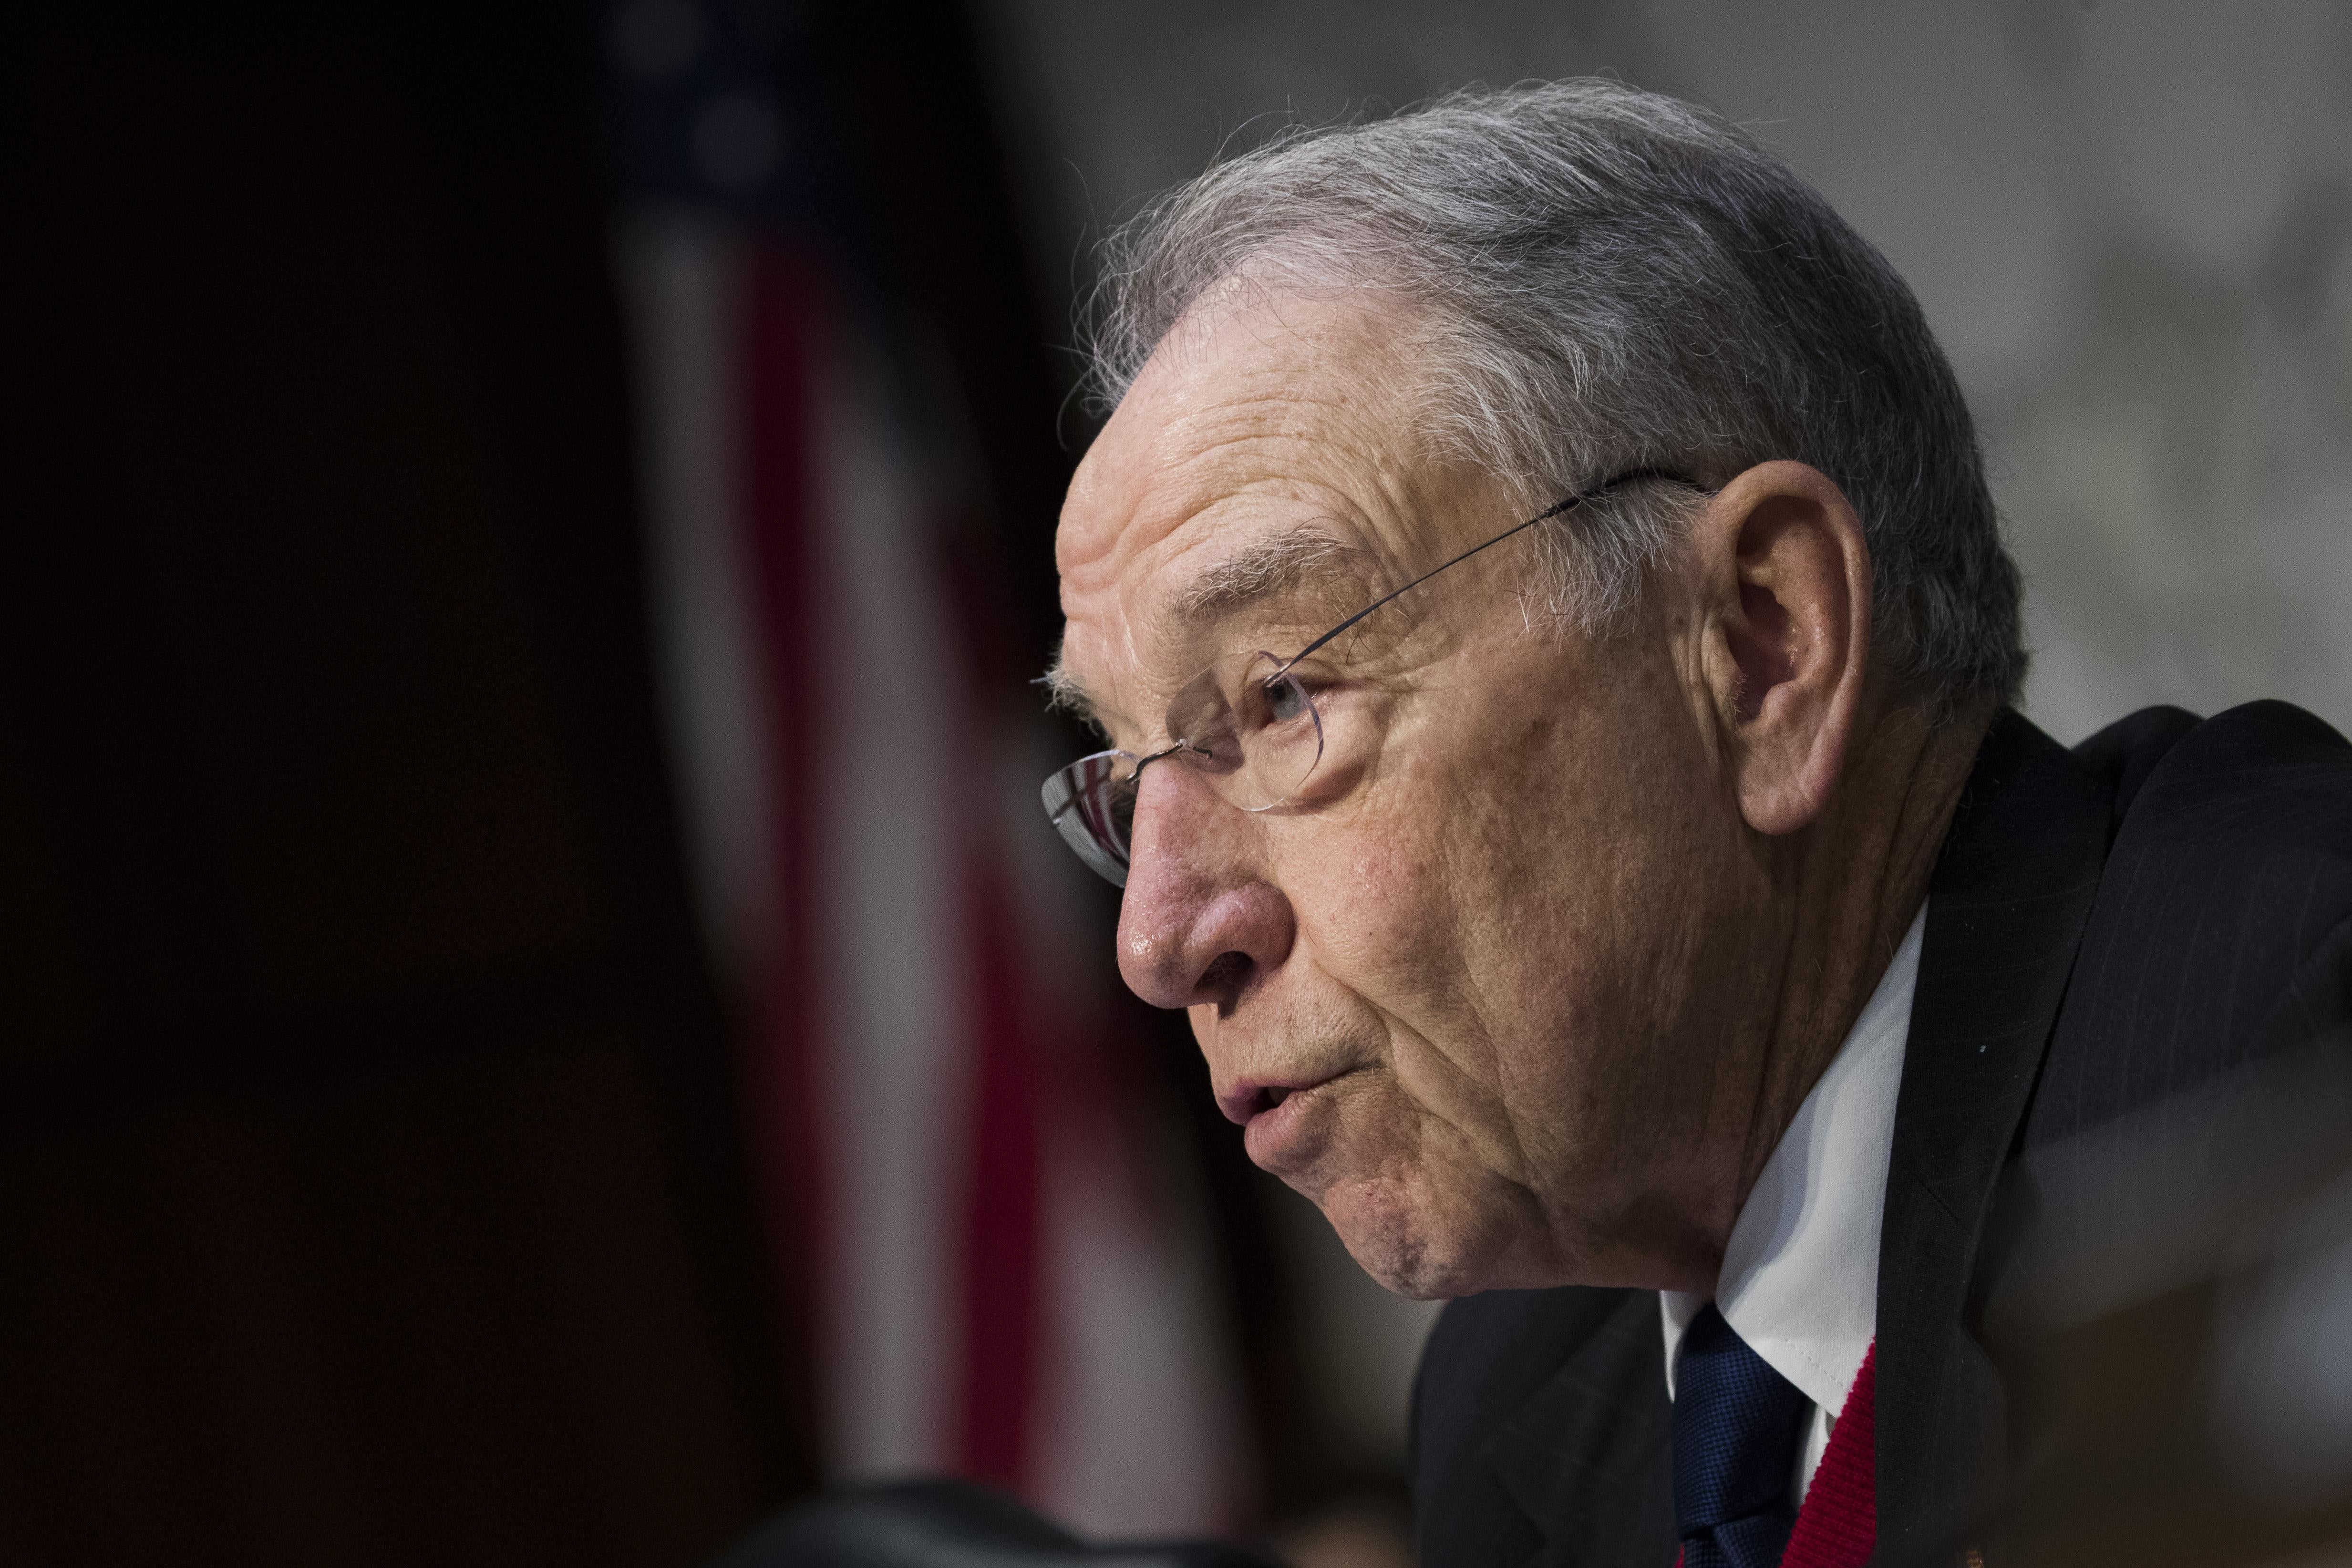 Chairman Sen. Chuck Grassley questions witnesses during a Senate Judiciary Committee hearing on Capitol Hill on Dec. 6 in Washington.